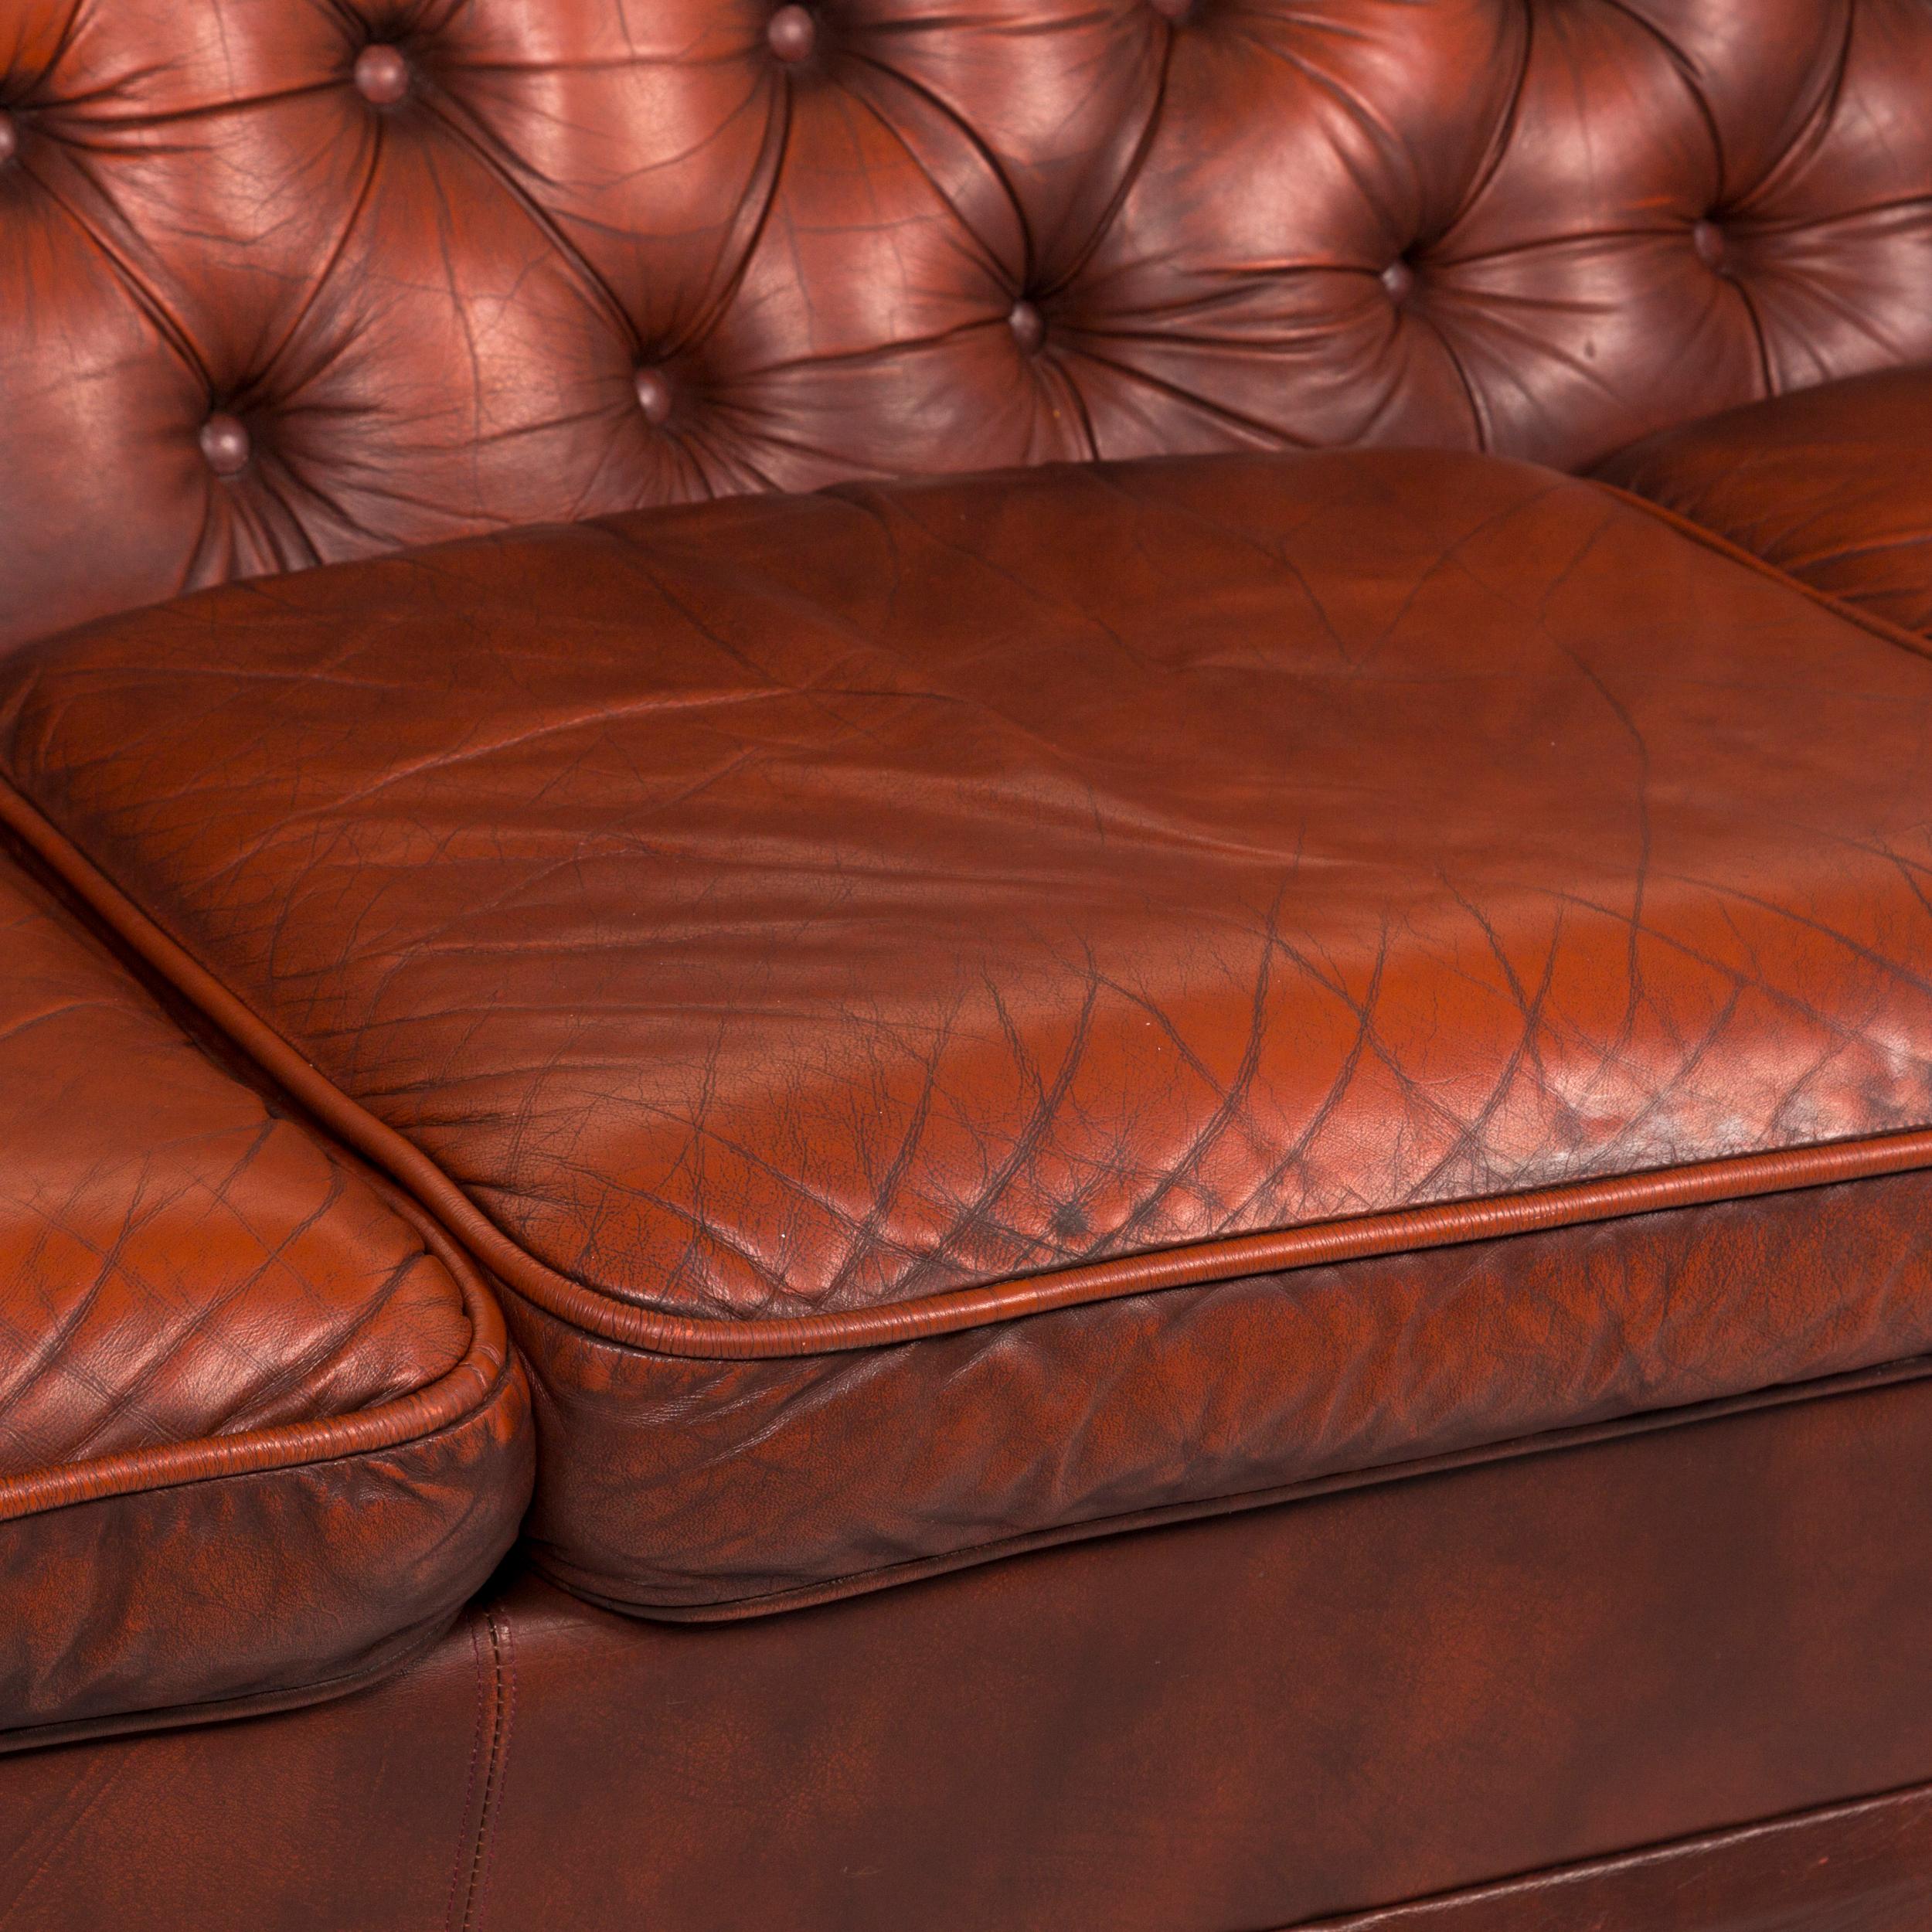 We present to you a Chesterfield leather sofa red three-seat retro vintage couch.
    
 

 Product measurements in centimeters:
 

Depth 89
Width 158
Height 74
Seat height 41
Rest height 61
Seat depth 53
Seat width 157
Back height